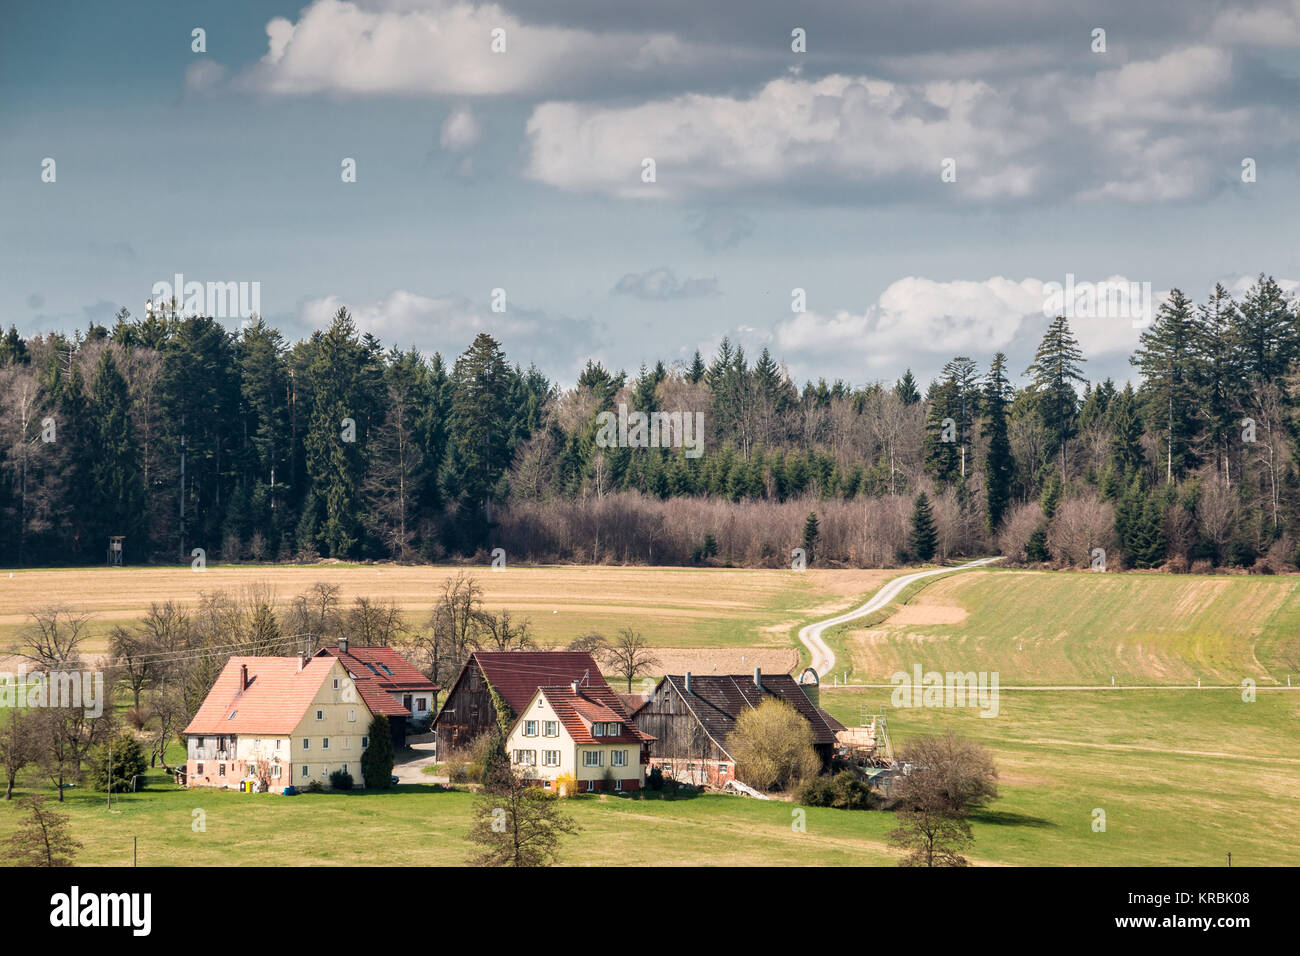 Little settlement with green fields and forests Stock Photo